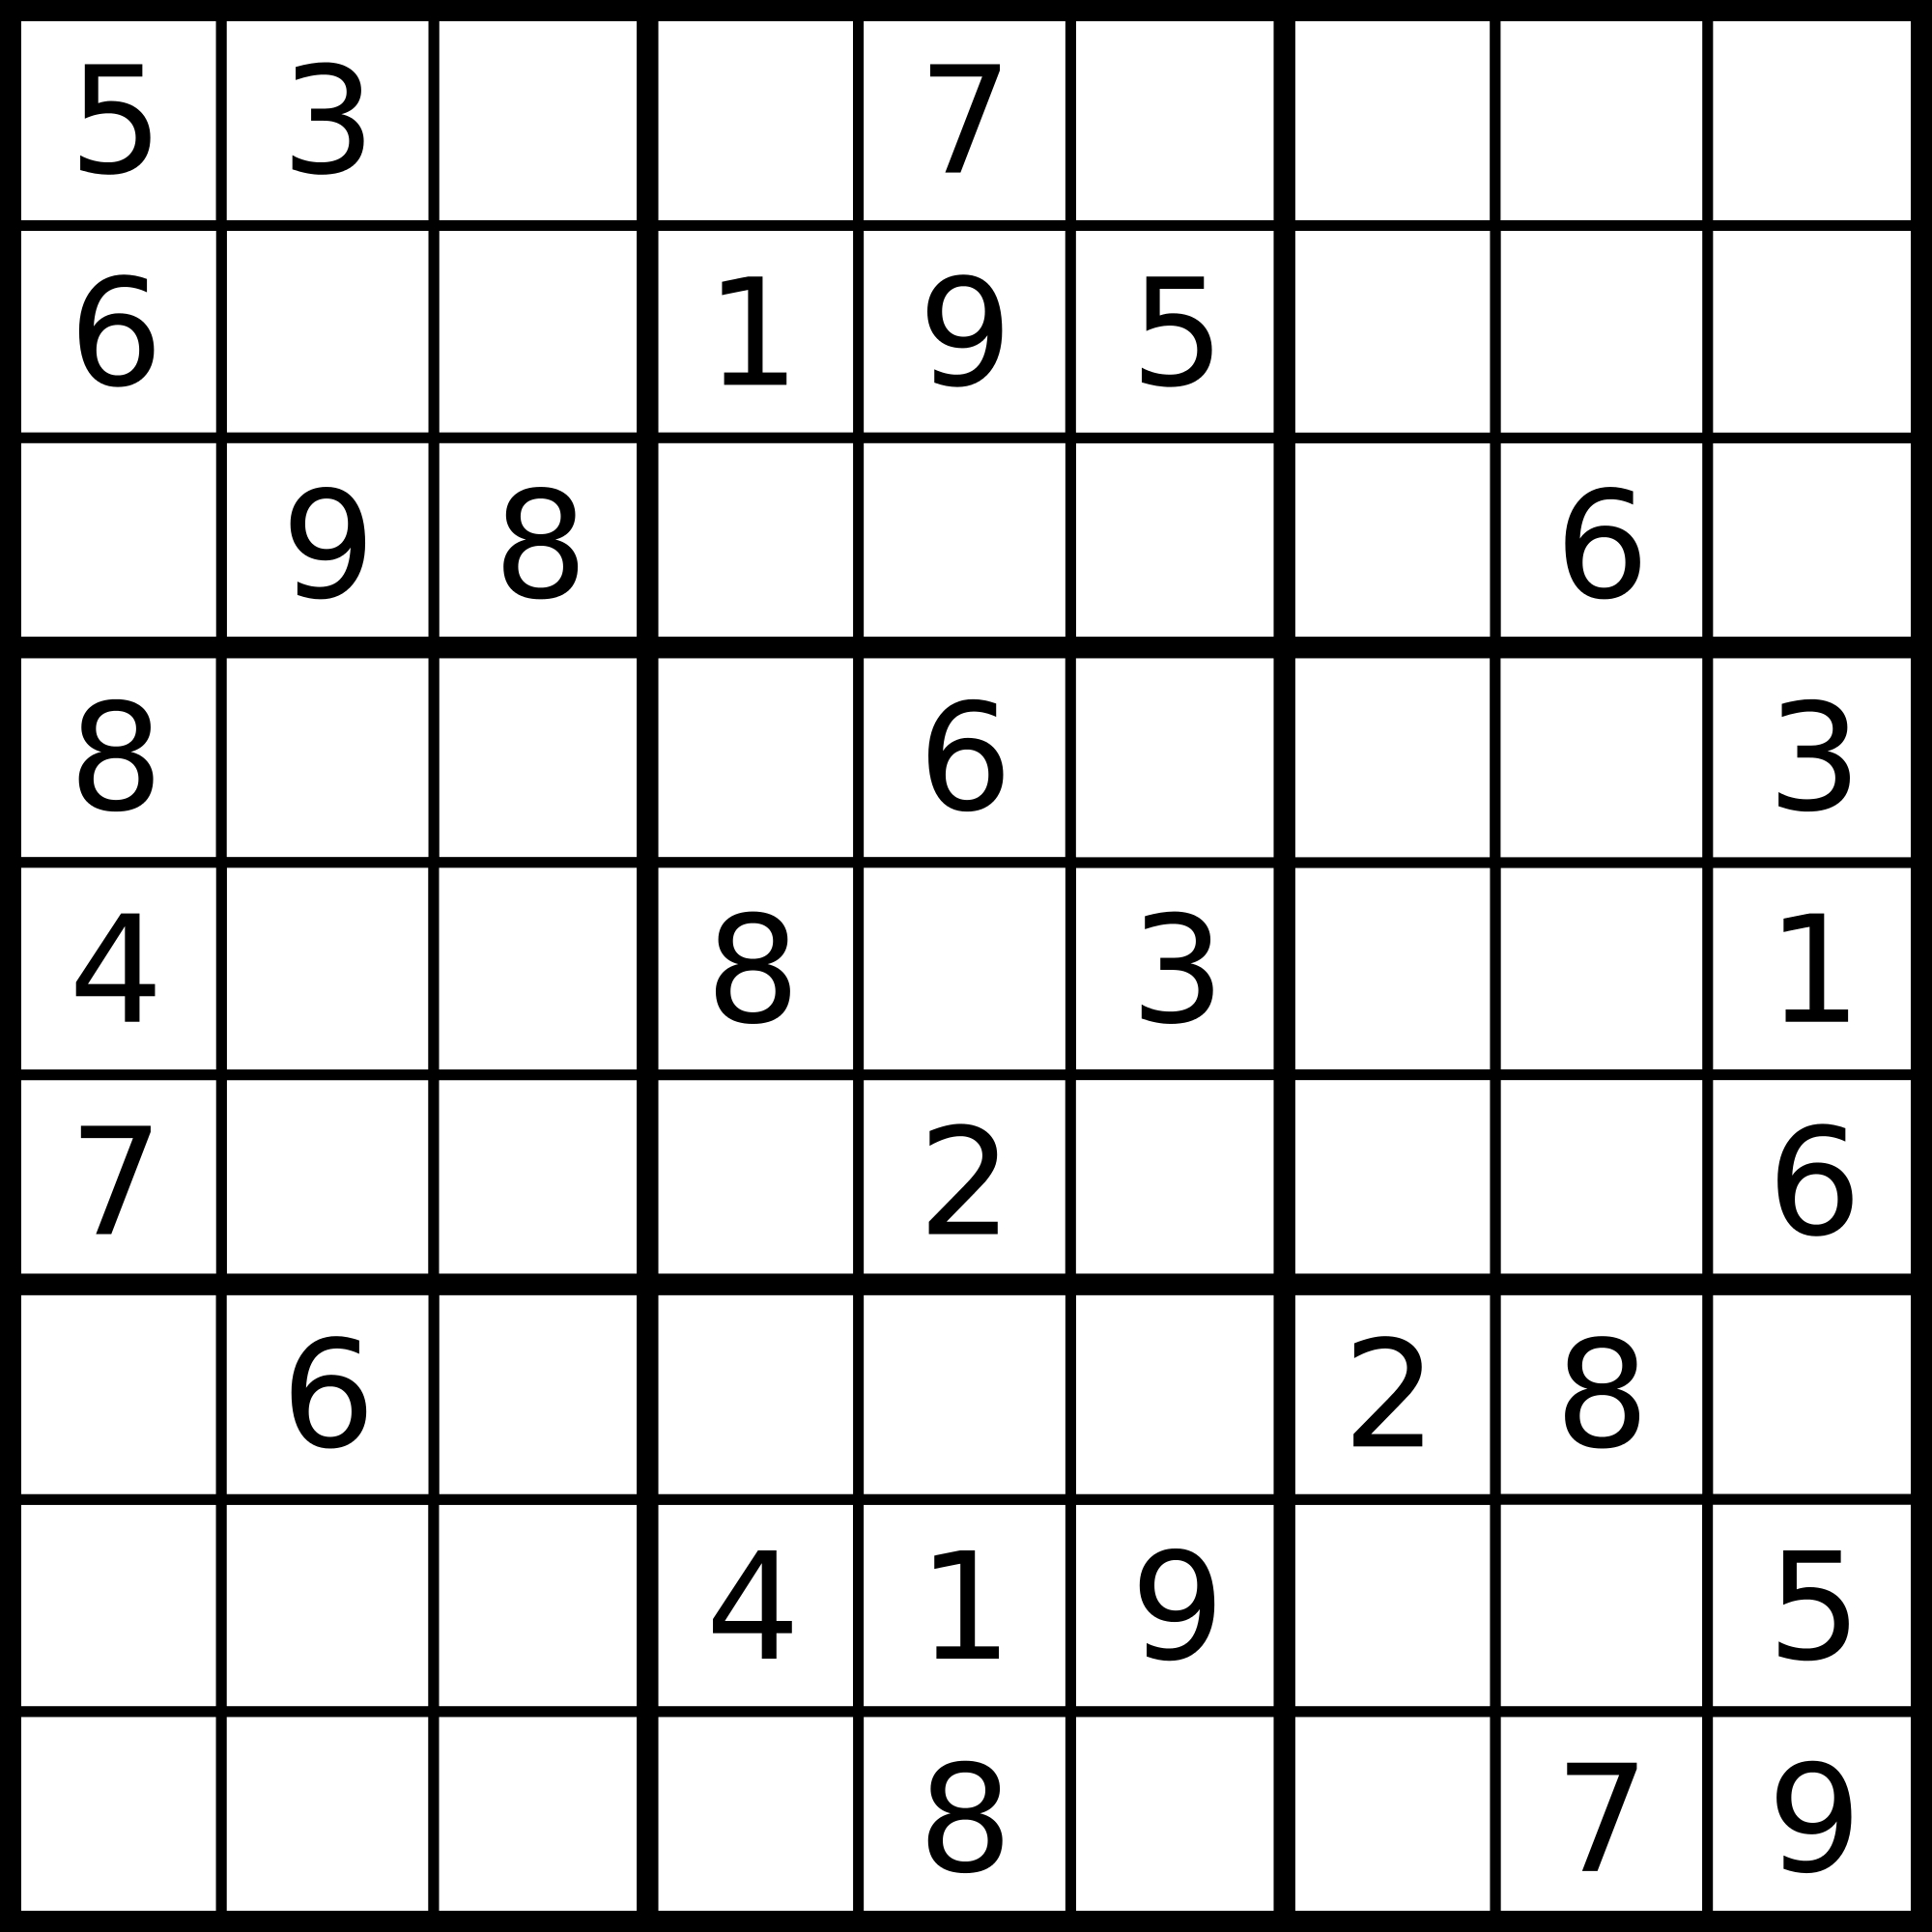 Leetcode: Check Whether Partially Filled Sudoku Is Valid